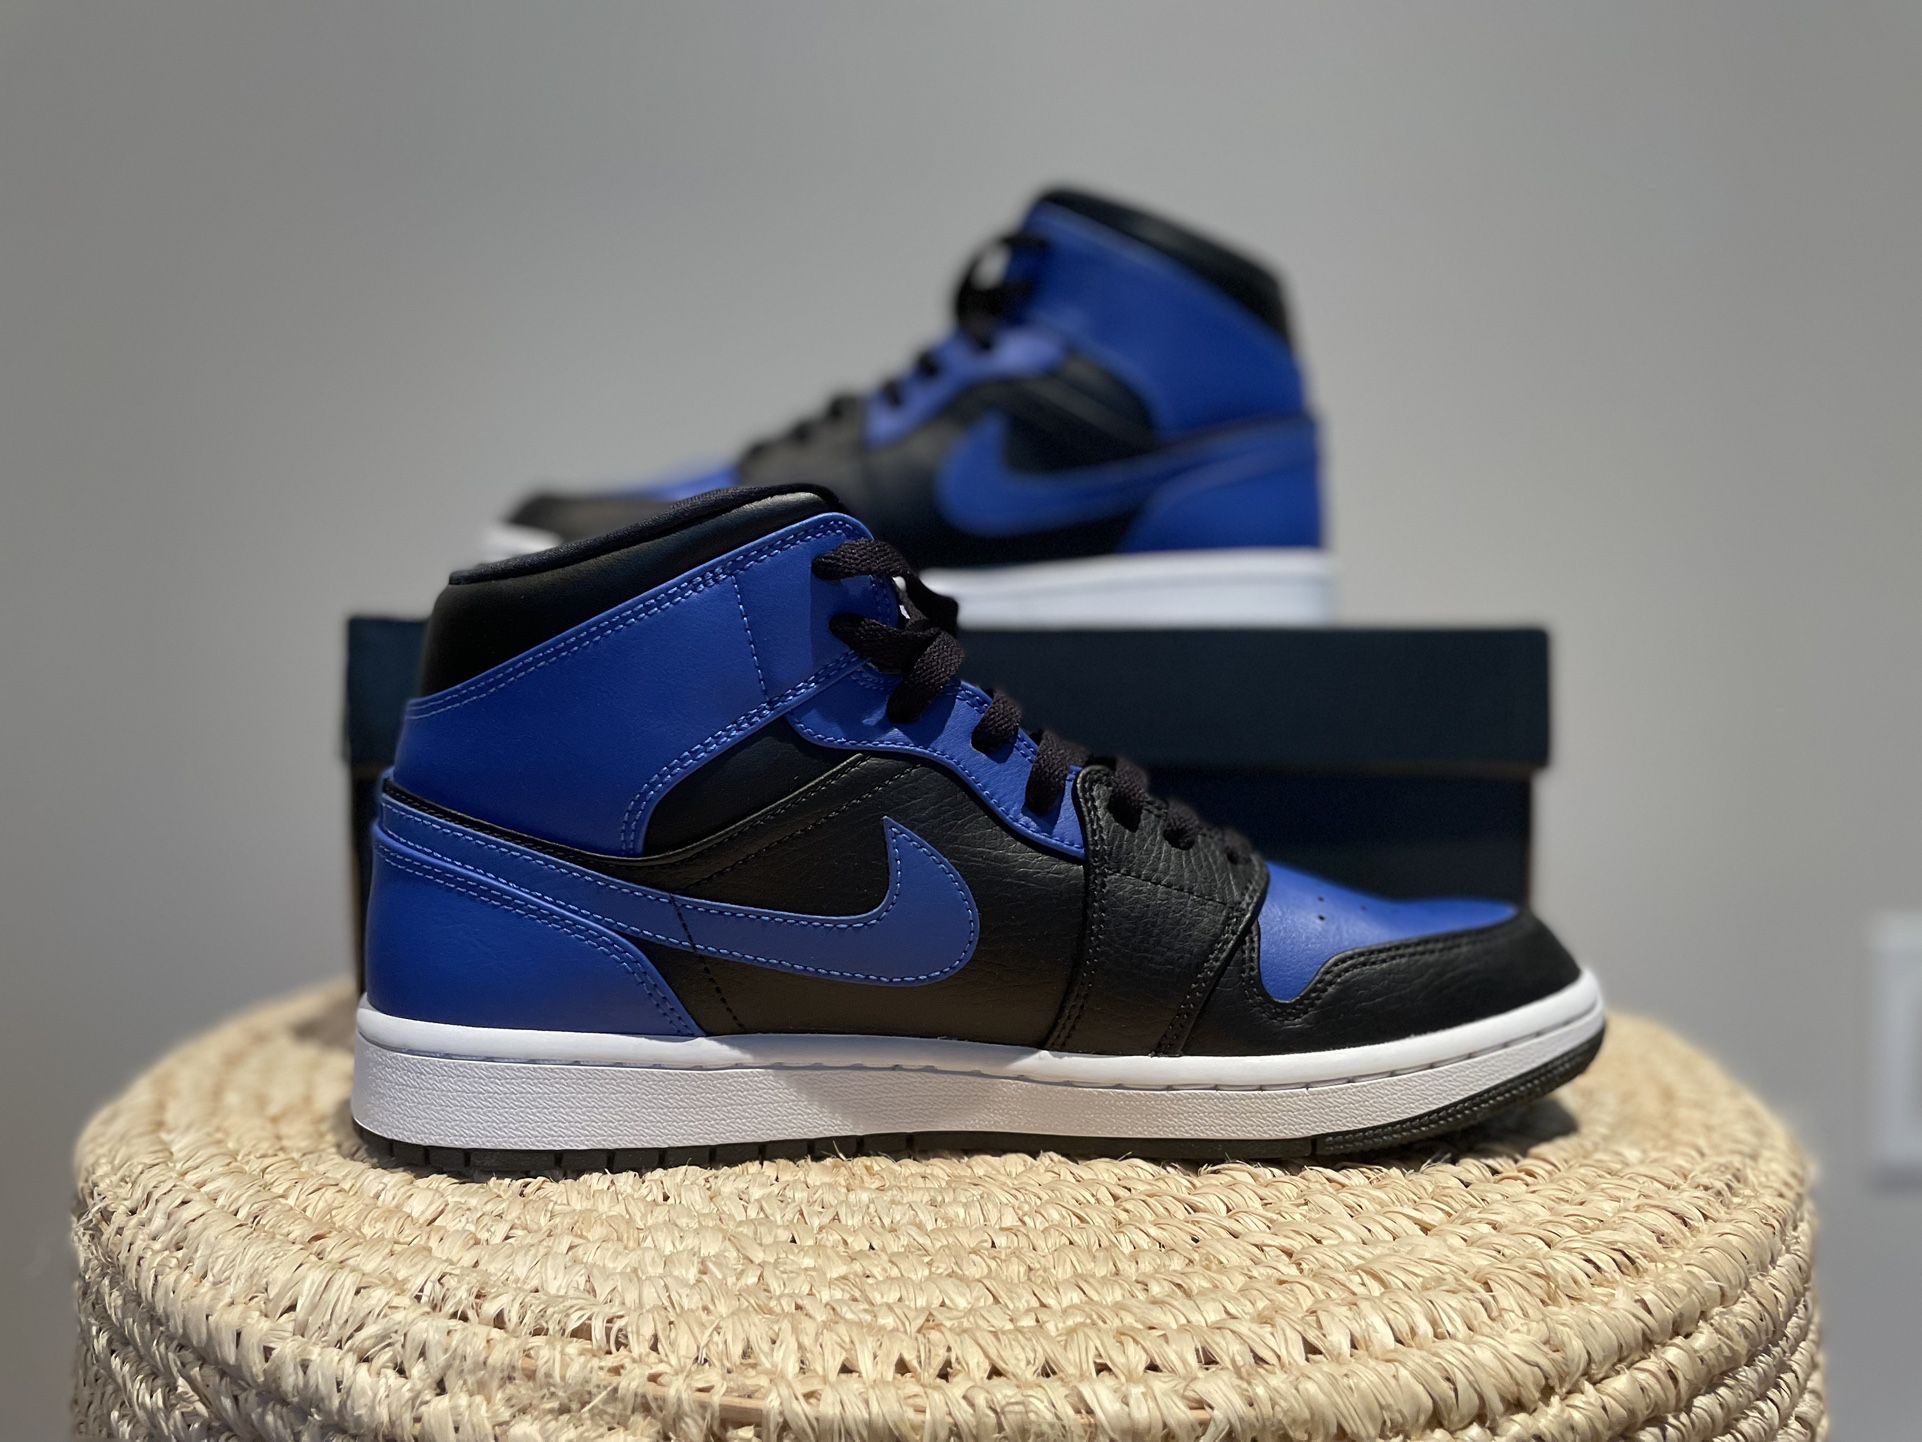 Nike Air Jordan 1 Hyper Royals 100% Authentic for Sale in Scarsdale, NY -  OfferUp